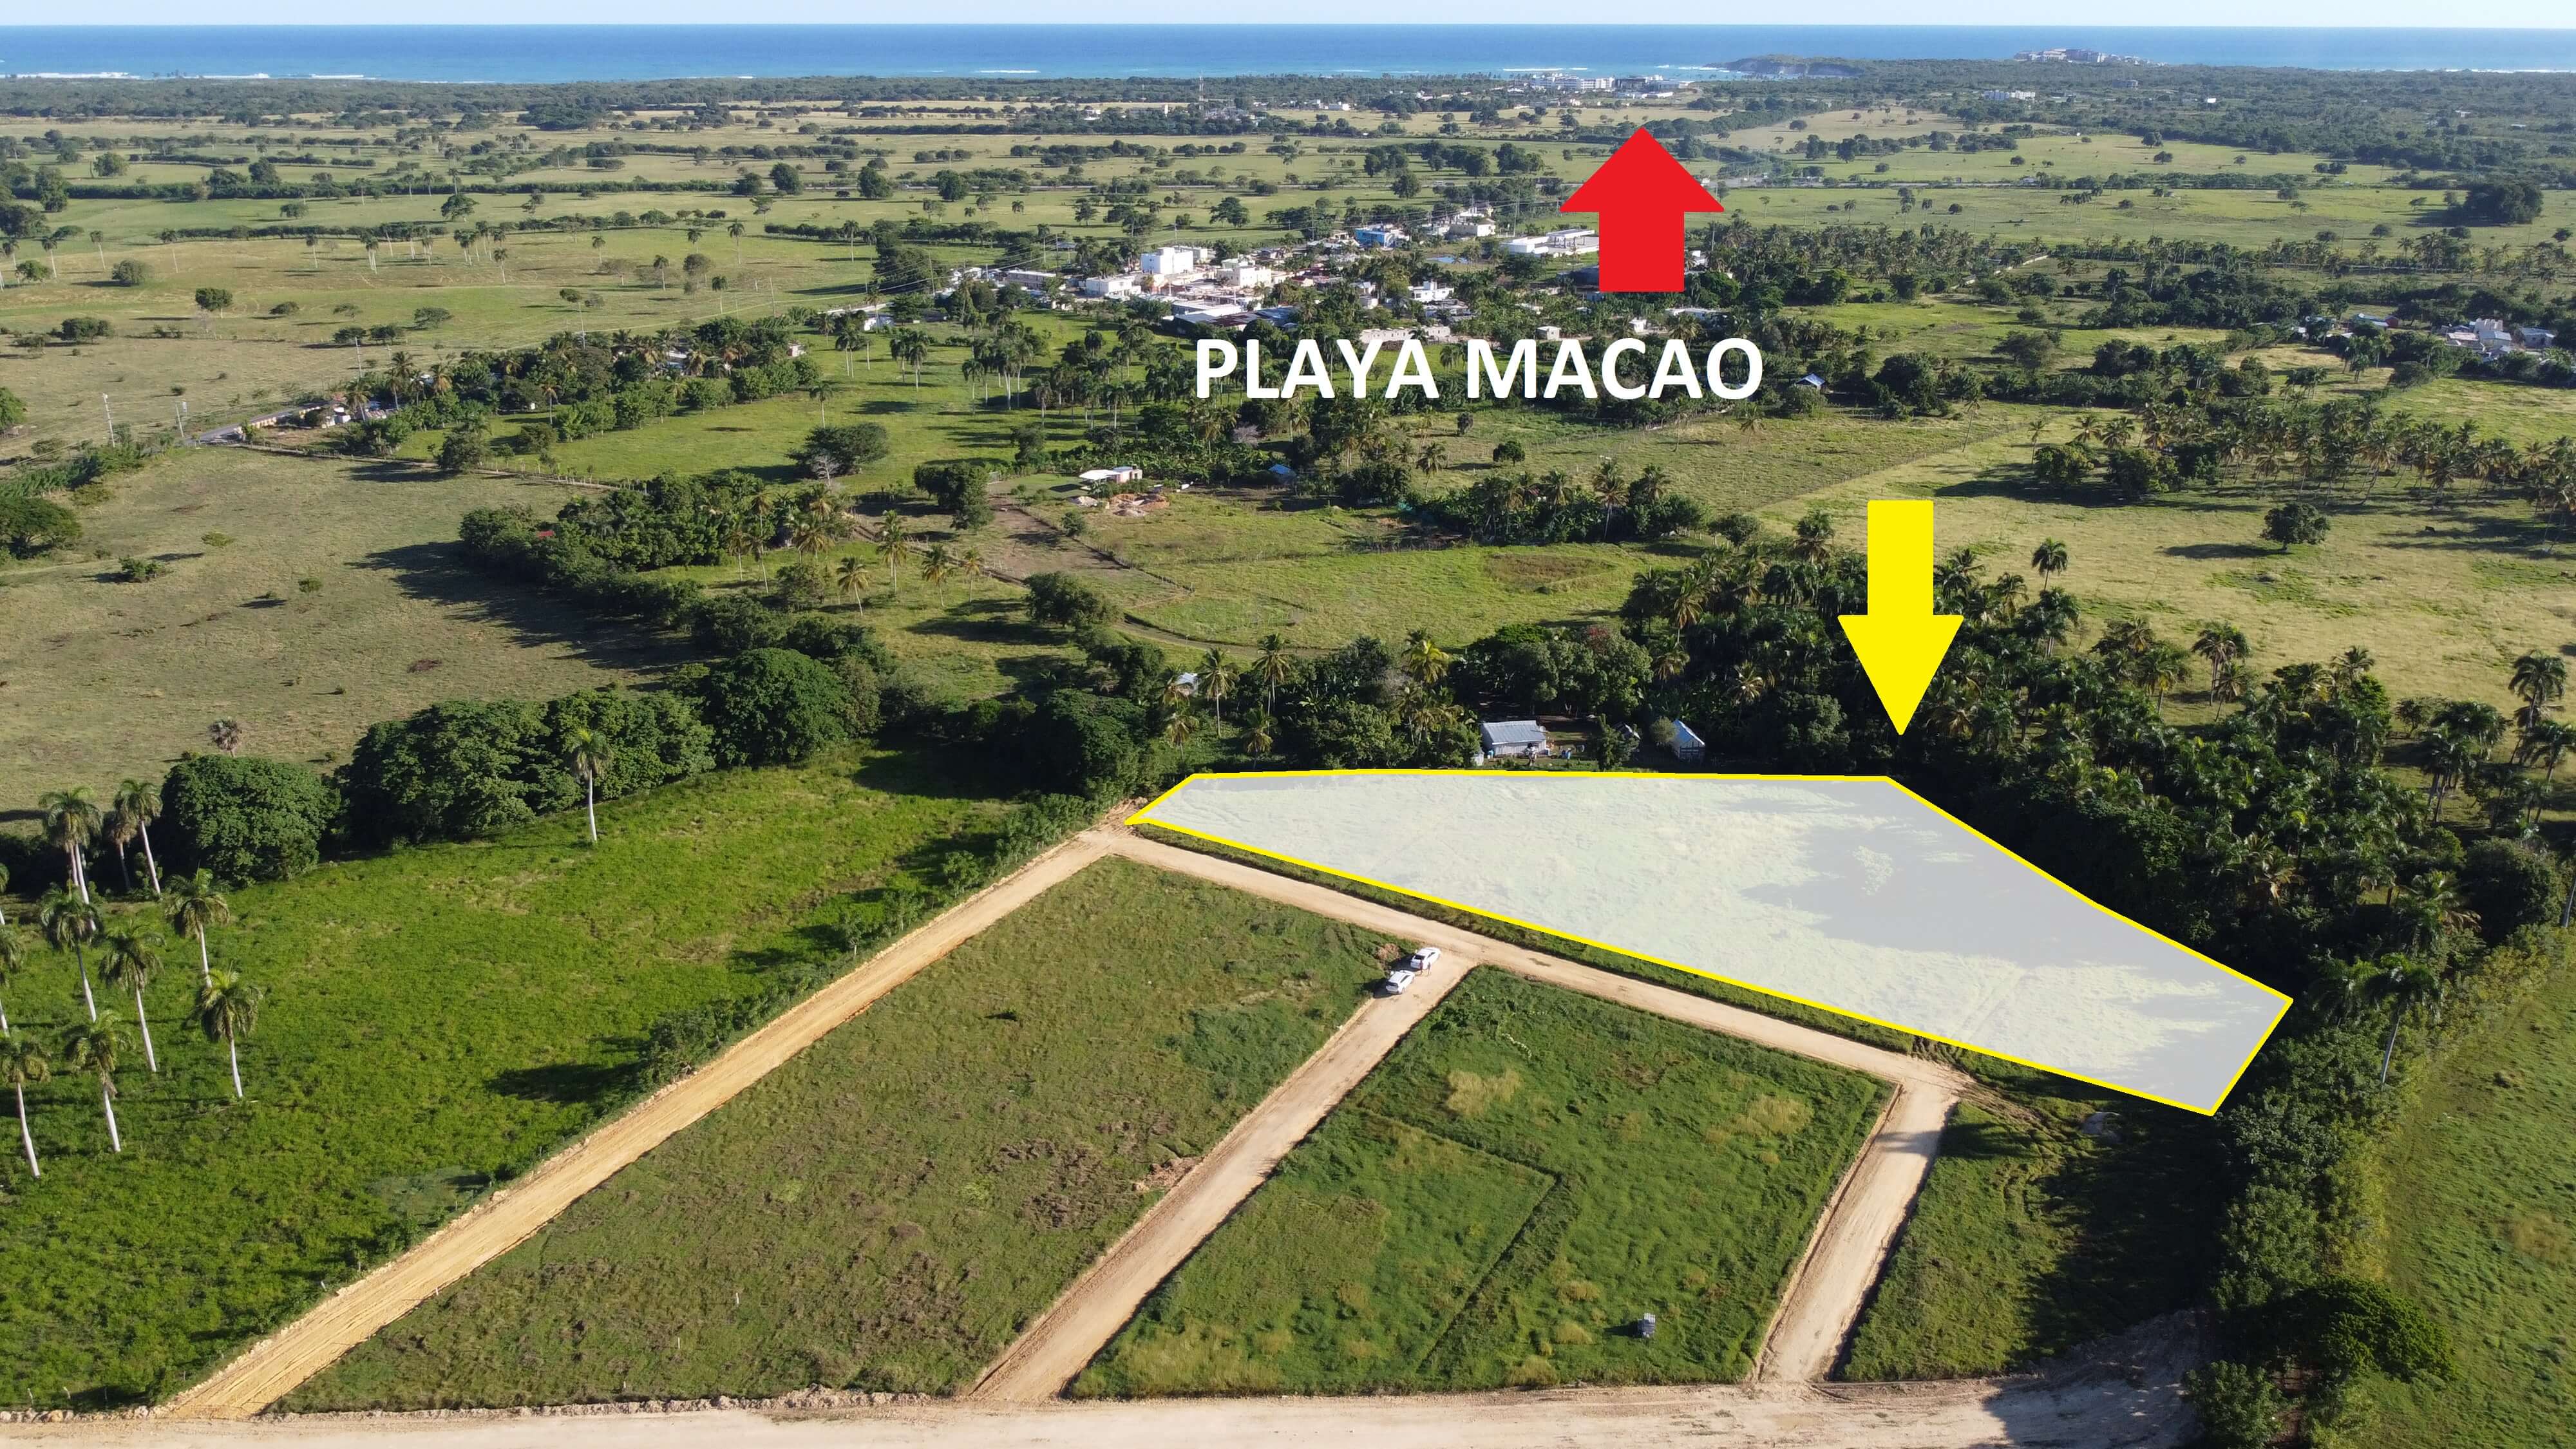 Land For Investment, 5 Min From The Beach Macao, Bávaro. Dominican Republic